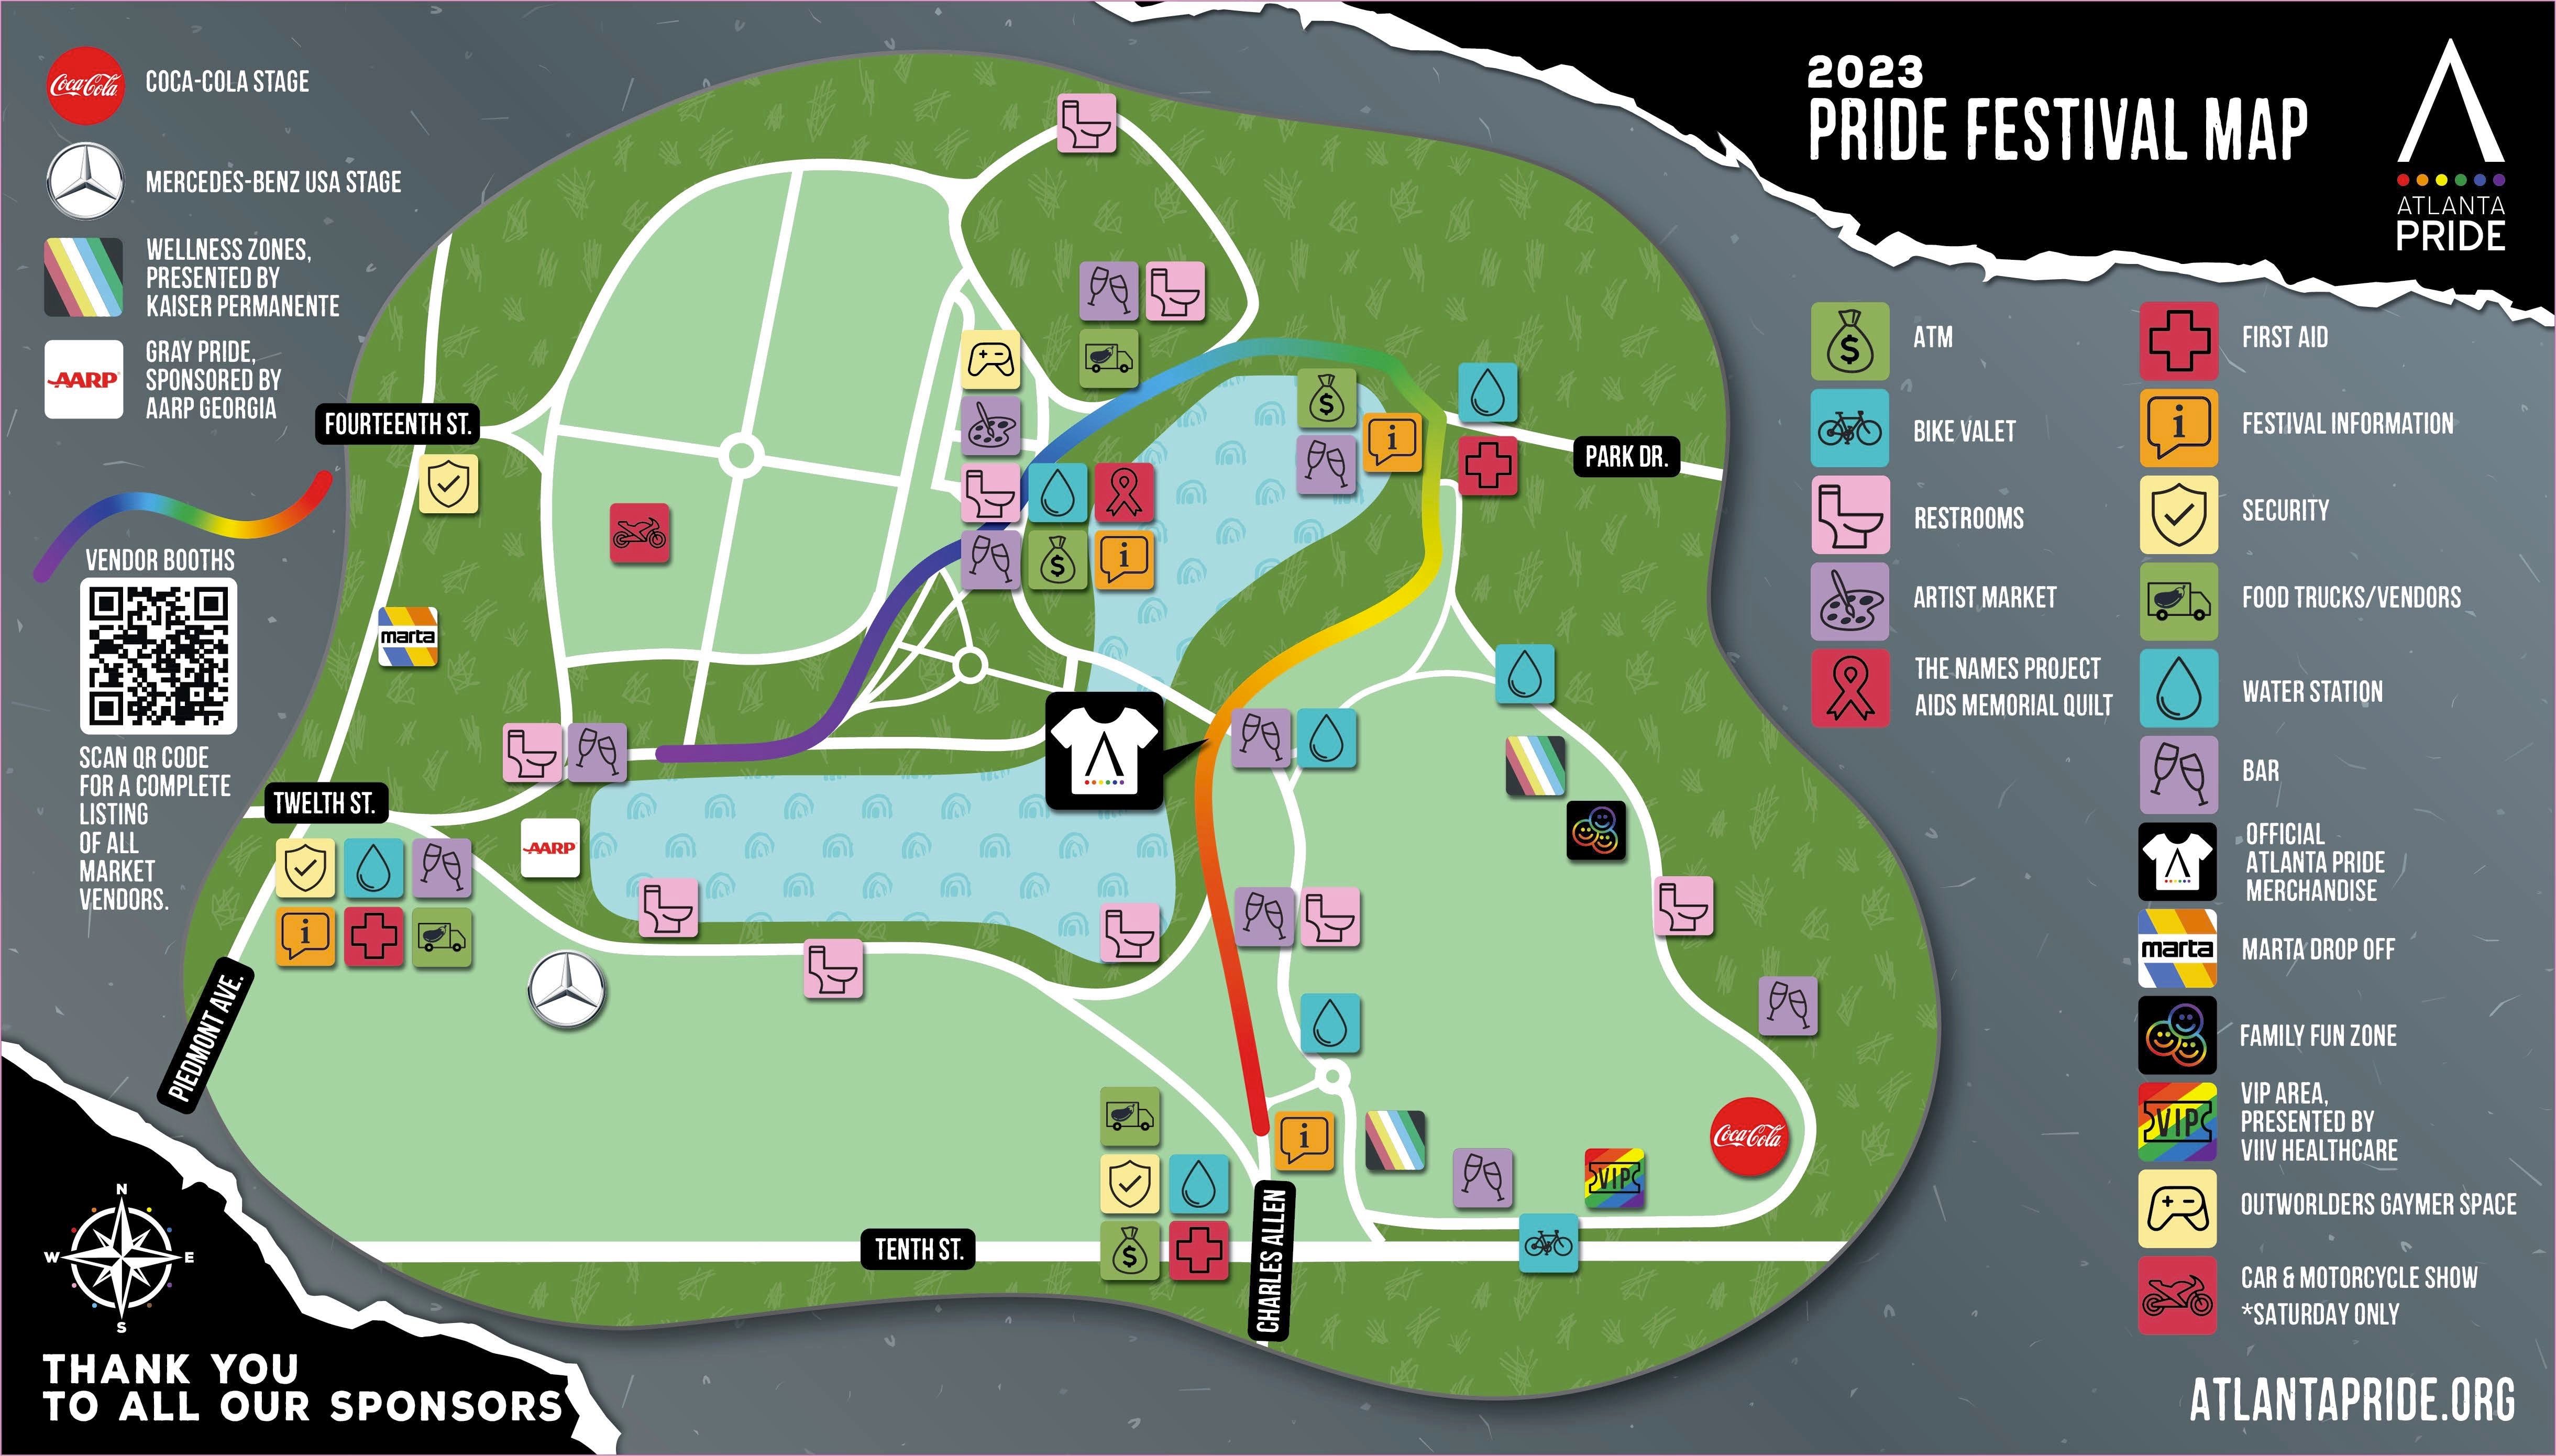 Map of 2023 Atlanta Pride Festival in Piedmont Park showing symbols and locations of ATMs, bike valet, Artist Market, The Names Project AIDS Memorial Quilt, festival information, Security, Food Trucks/Vendors, Bar, Official Atlanta Pride Merchandise, MARTA drop off, Family fun zone, VIP area, Outworlders Gaymer Space, Car & Motorcycle show, restrooms, first aid centers, and water stations.